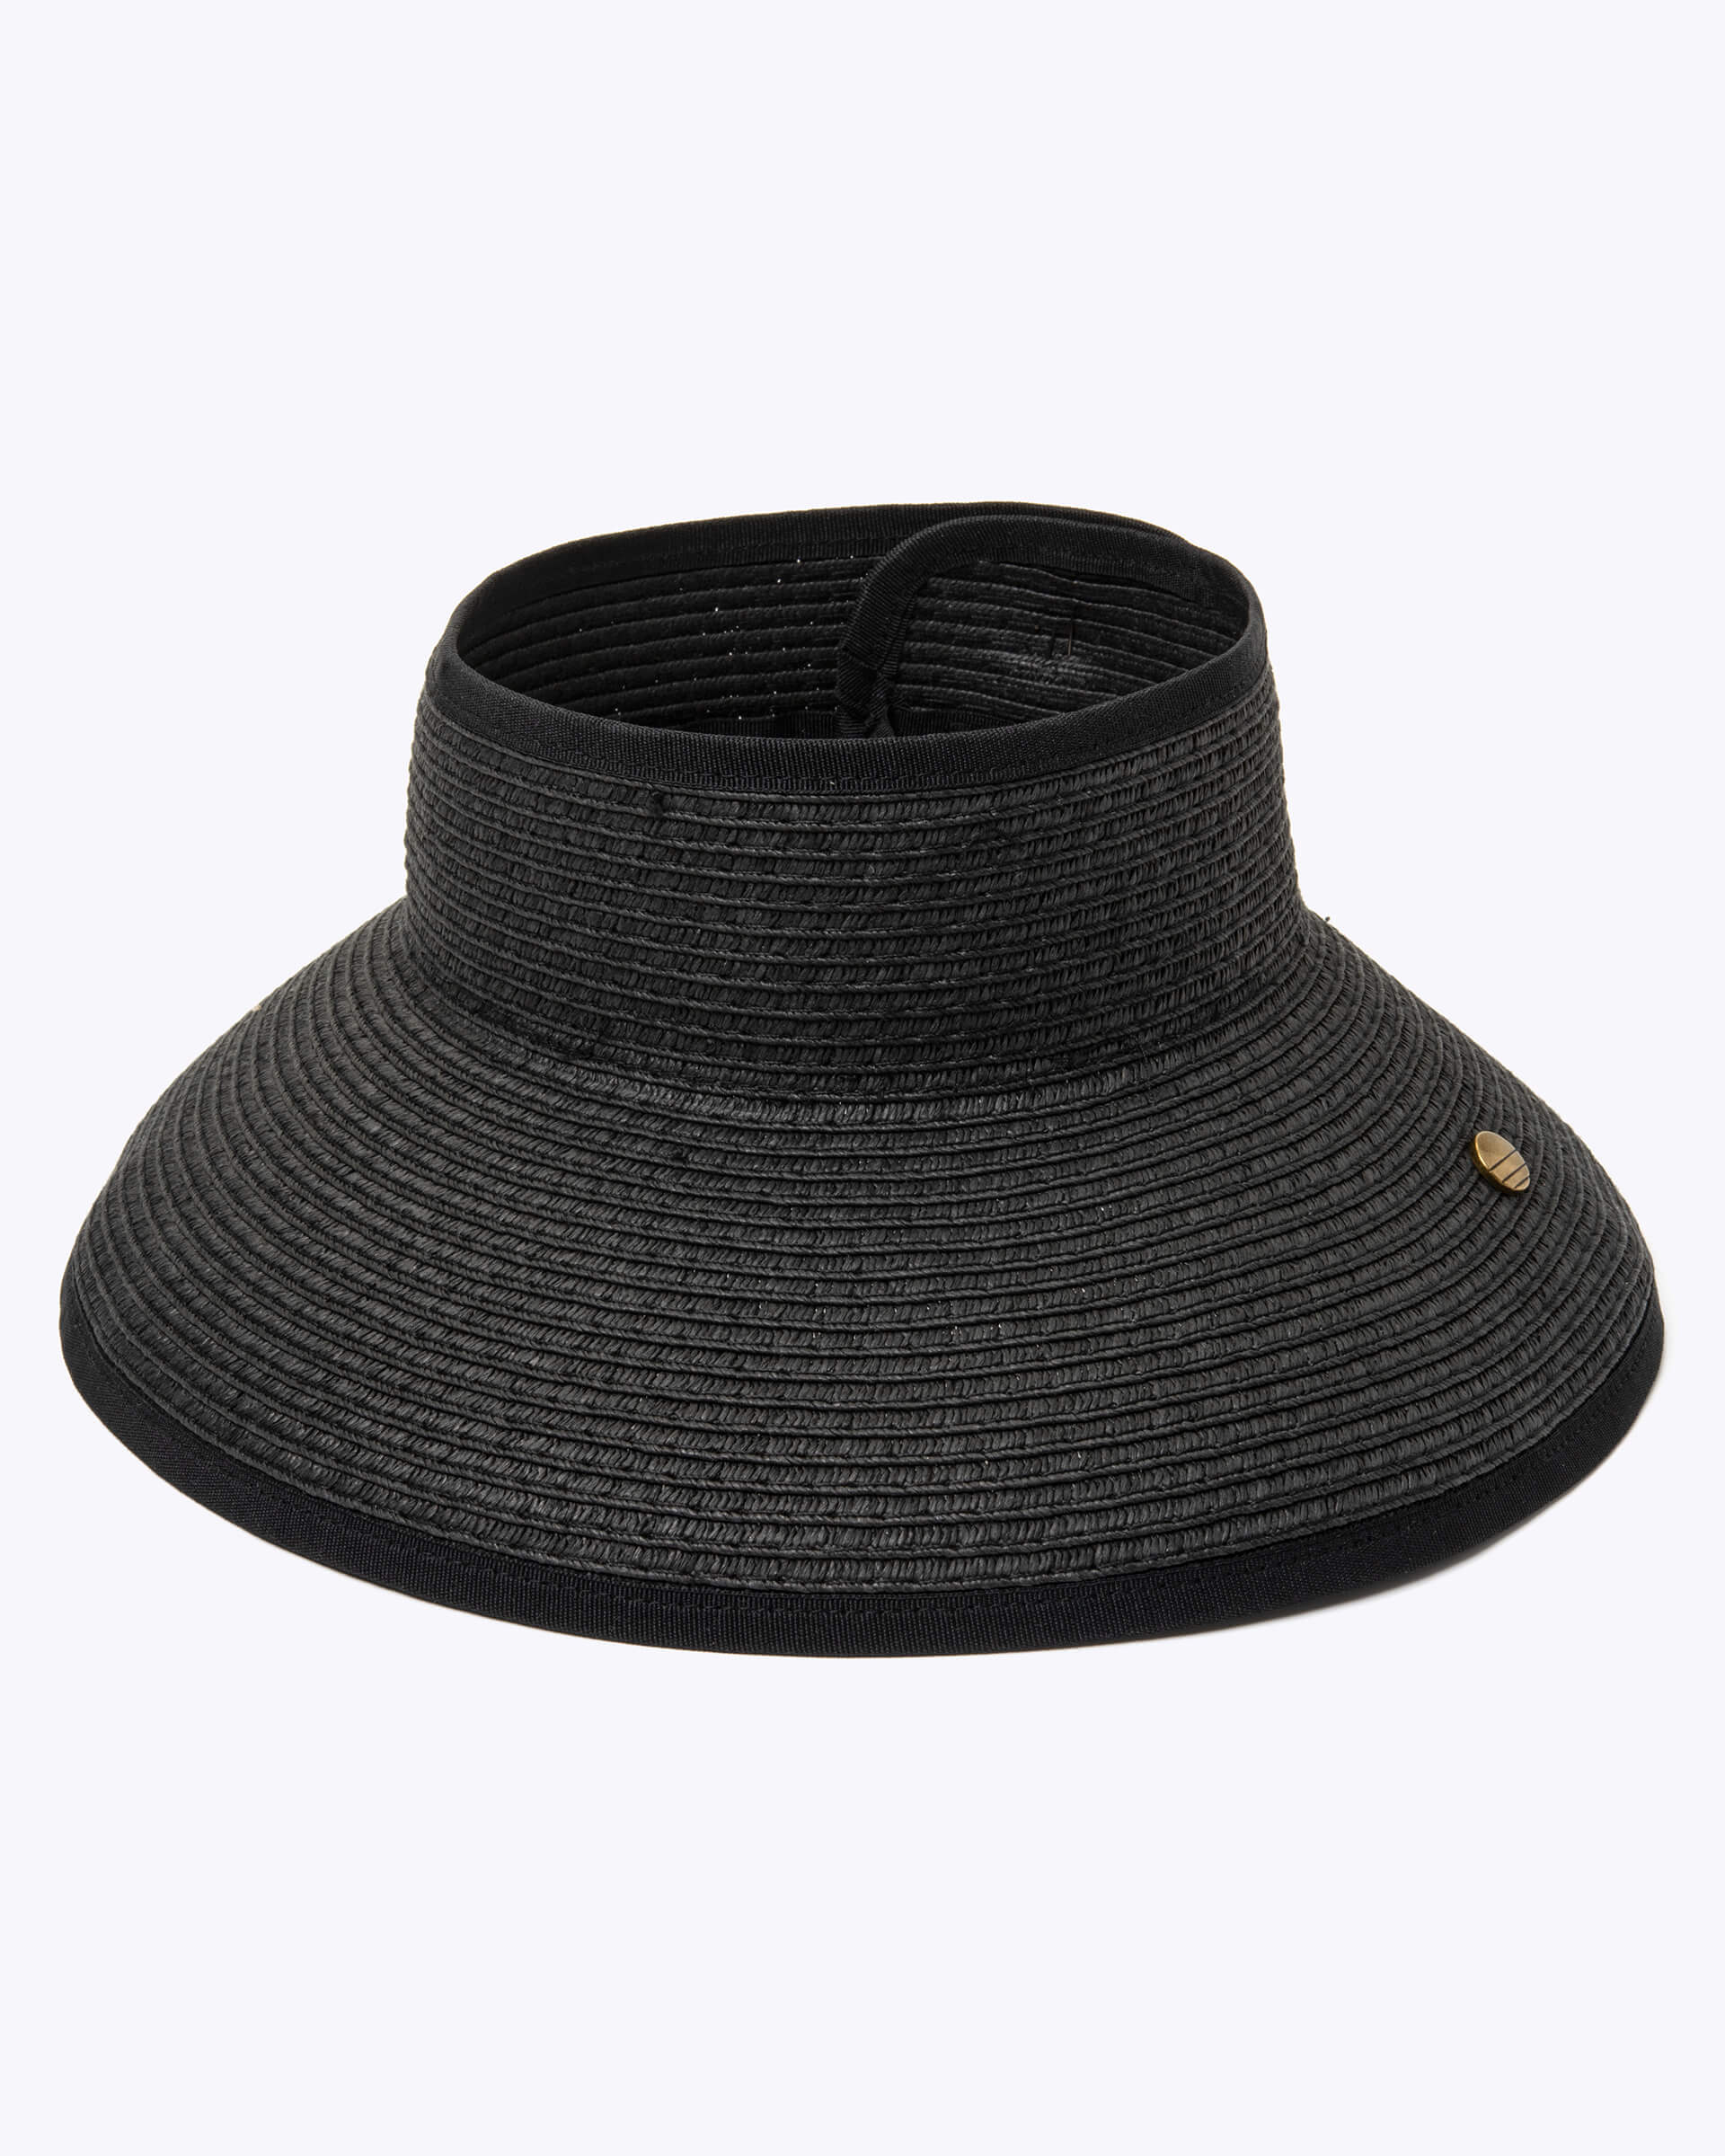 black roll-up wide brim visor hat that snaps together with opening on the top on a white background